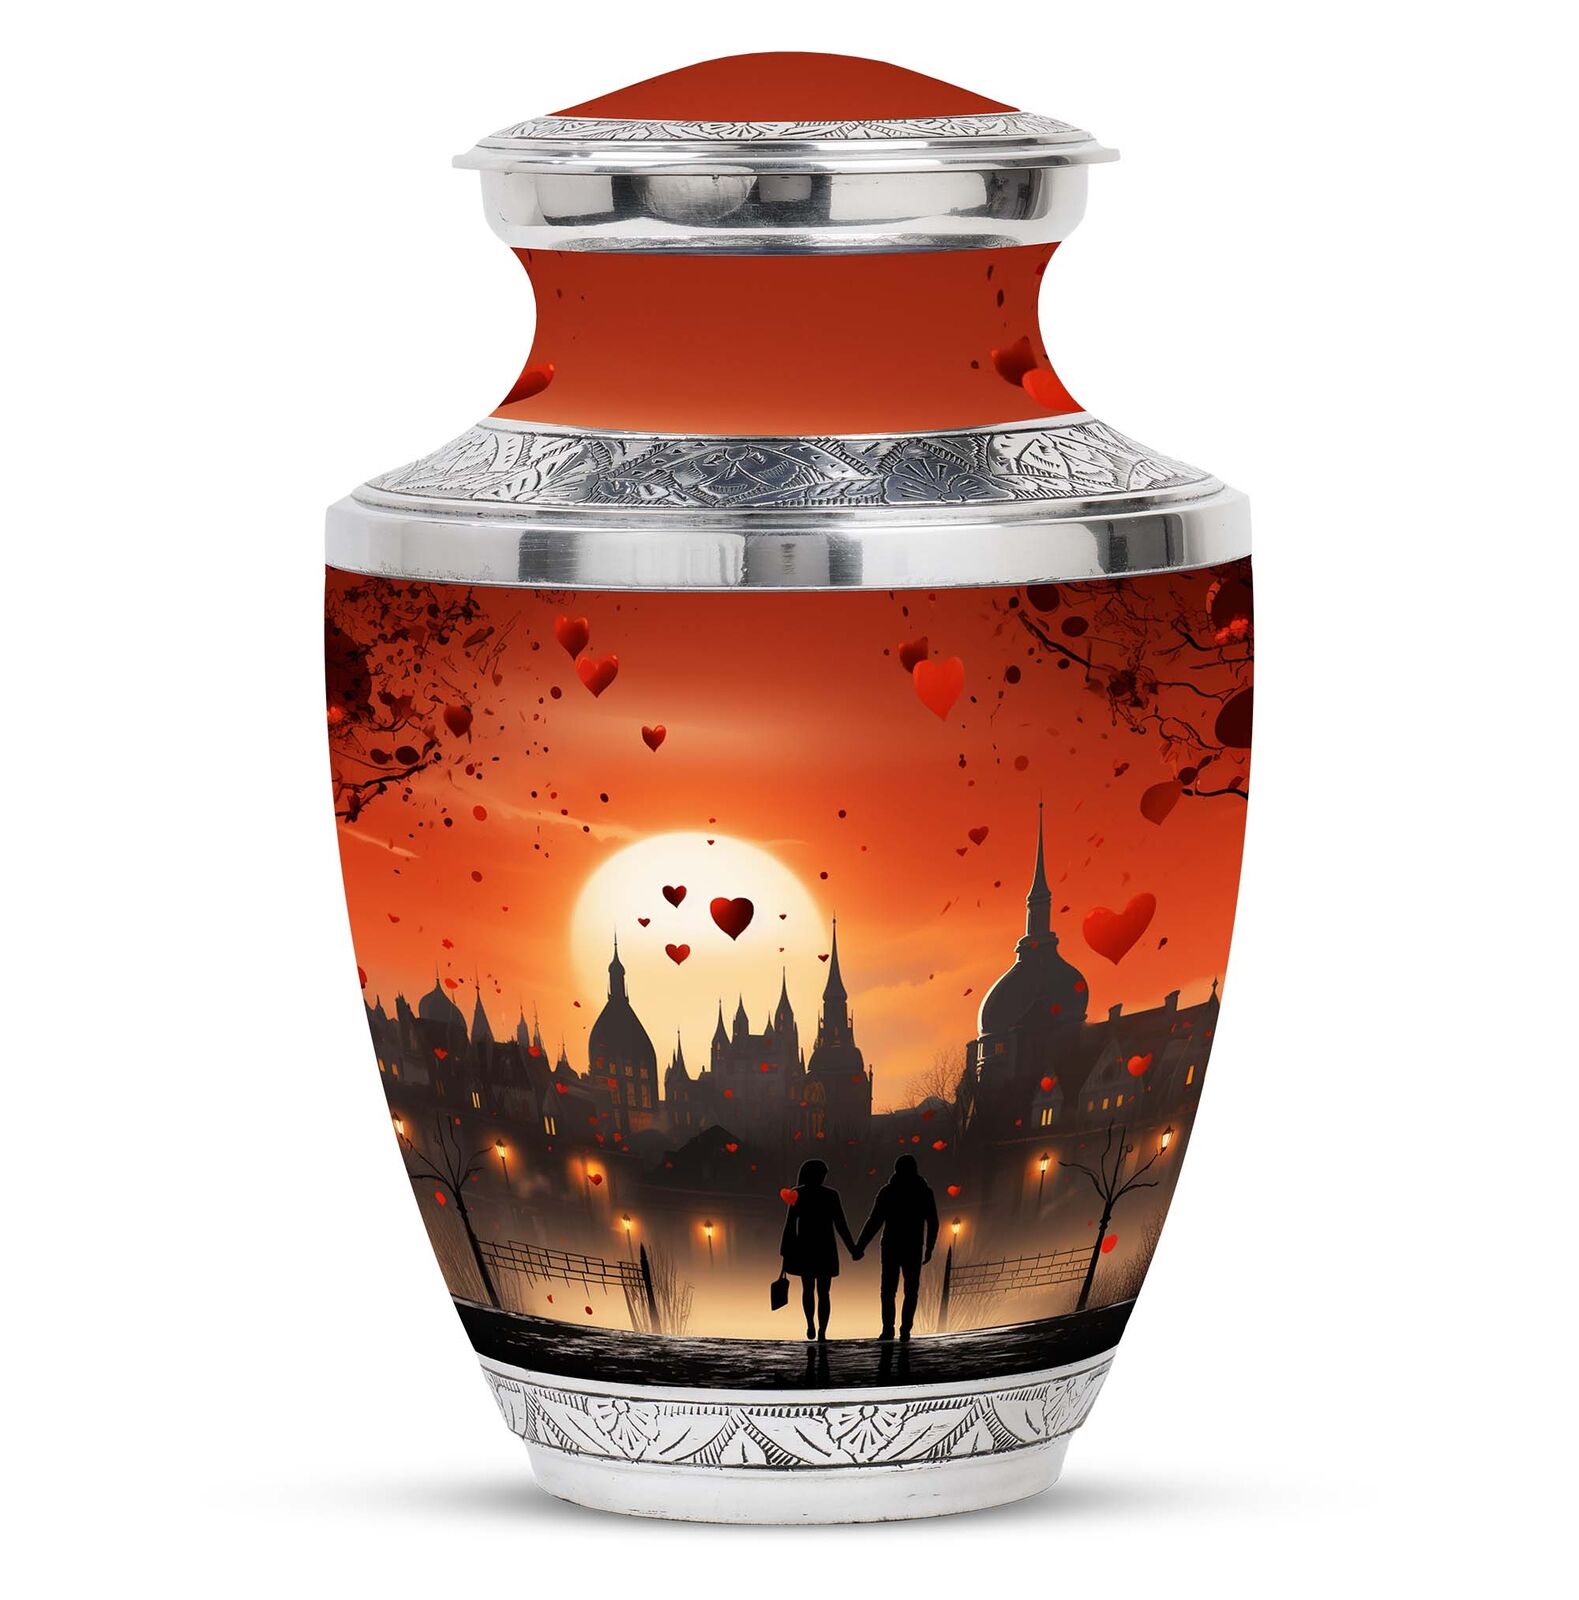 Sunset Promenade in City of Romance Large Modern Urns For Human Ashes 200 cu In